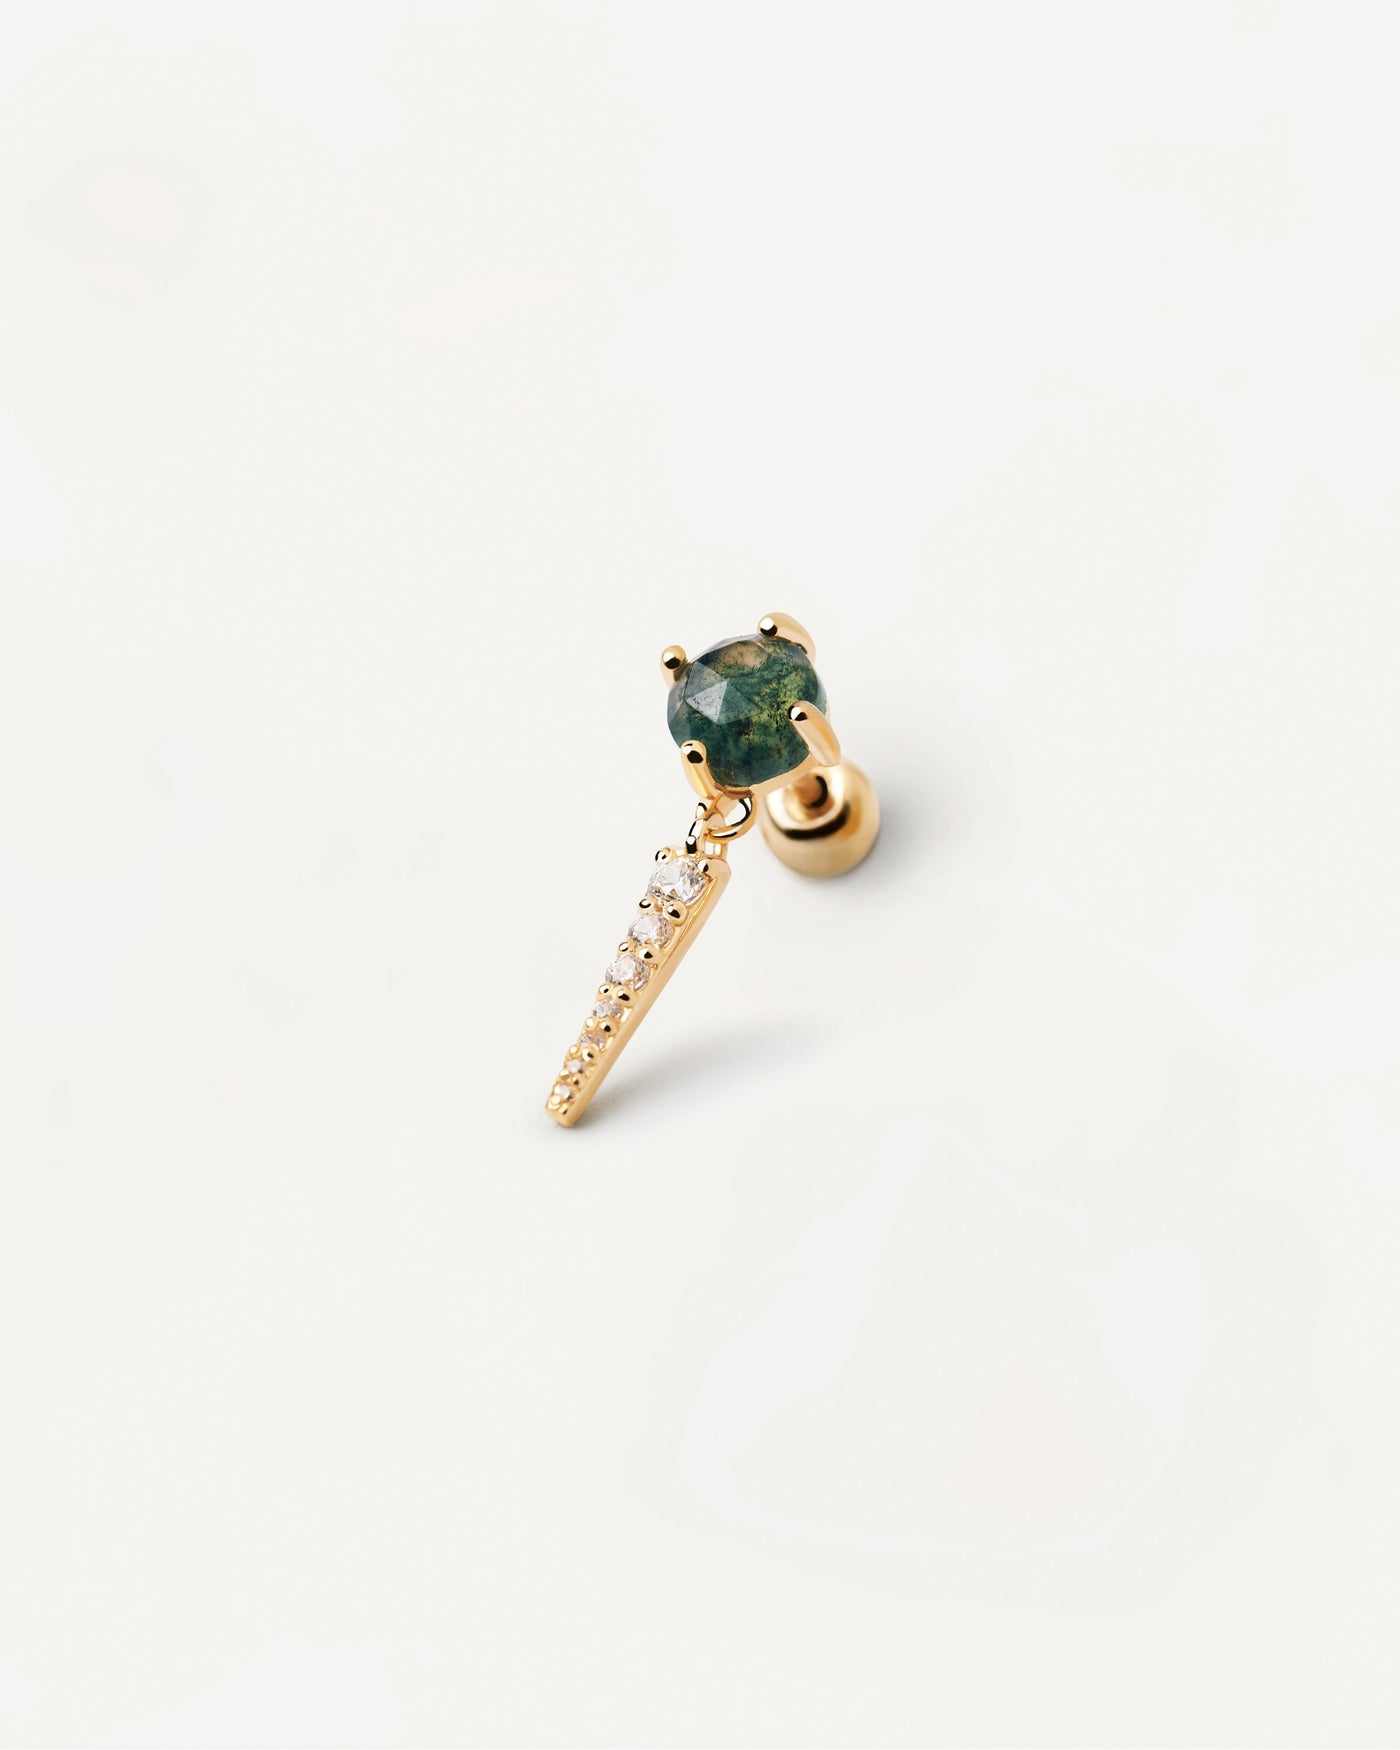 2023 Selection | Yoki Moss Agate Single Earring. Gold-plated ear piercing with dark green gemstone and white zirconia pendant. Get the latest arrival from PDPAOLA. Place your order safely and get this Best Seller. Free Shipping.